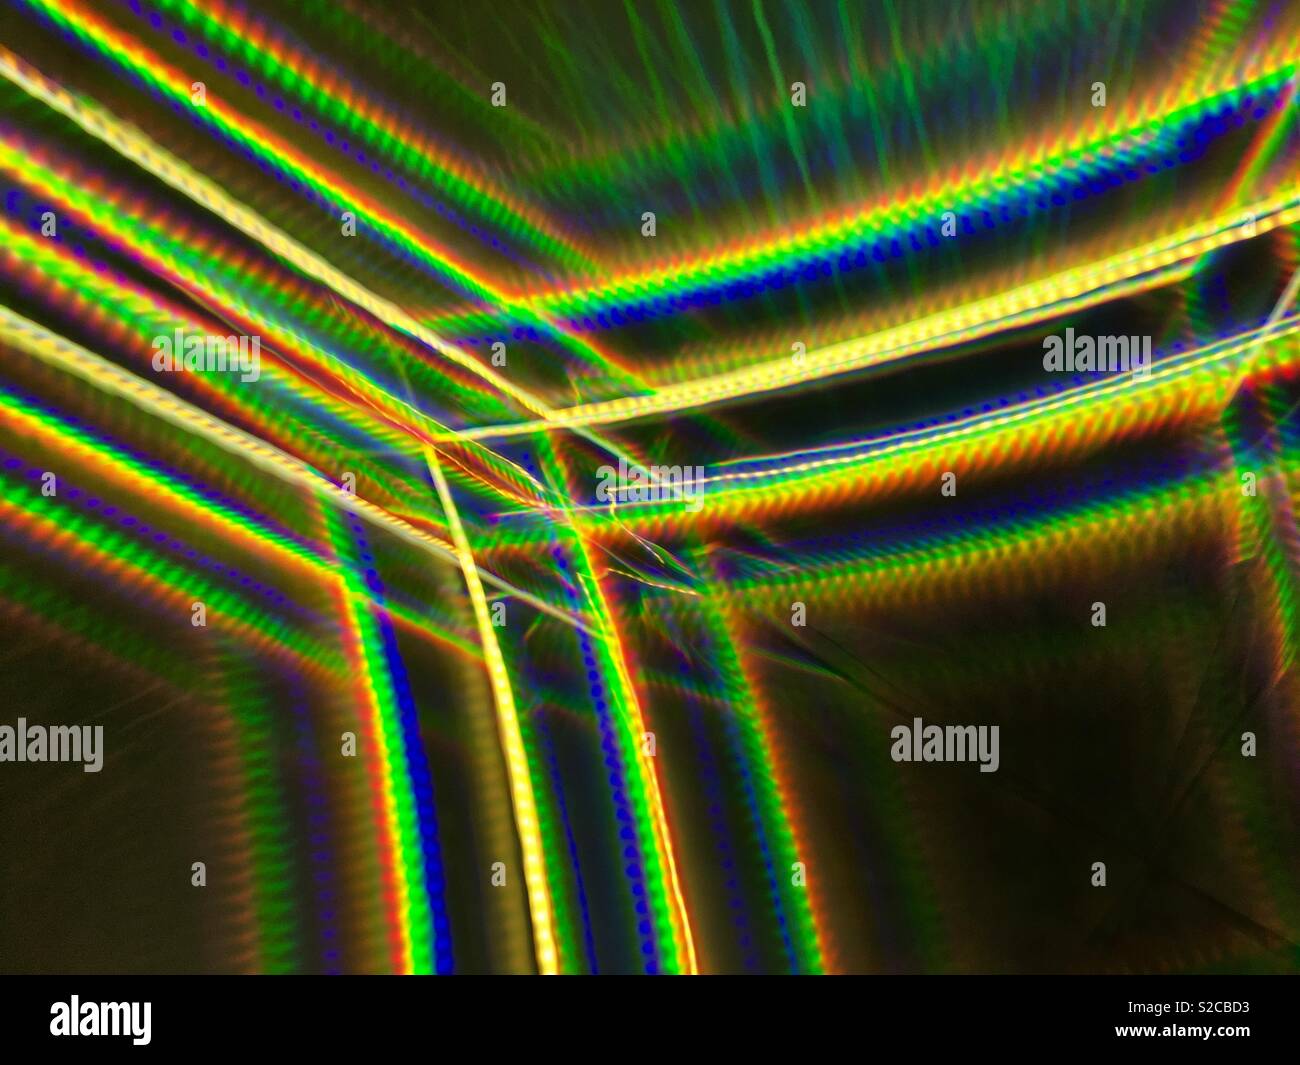 Light refractions causing prisms Stock Photo